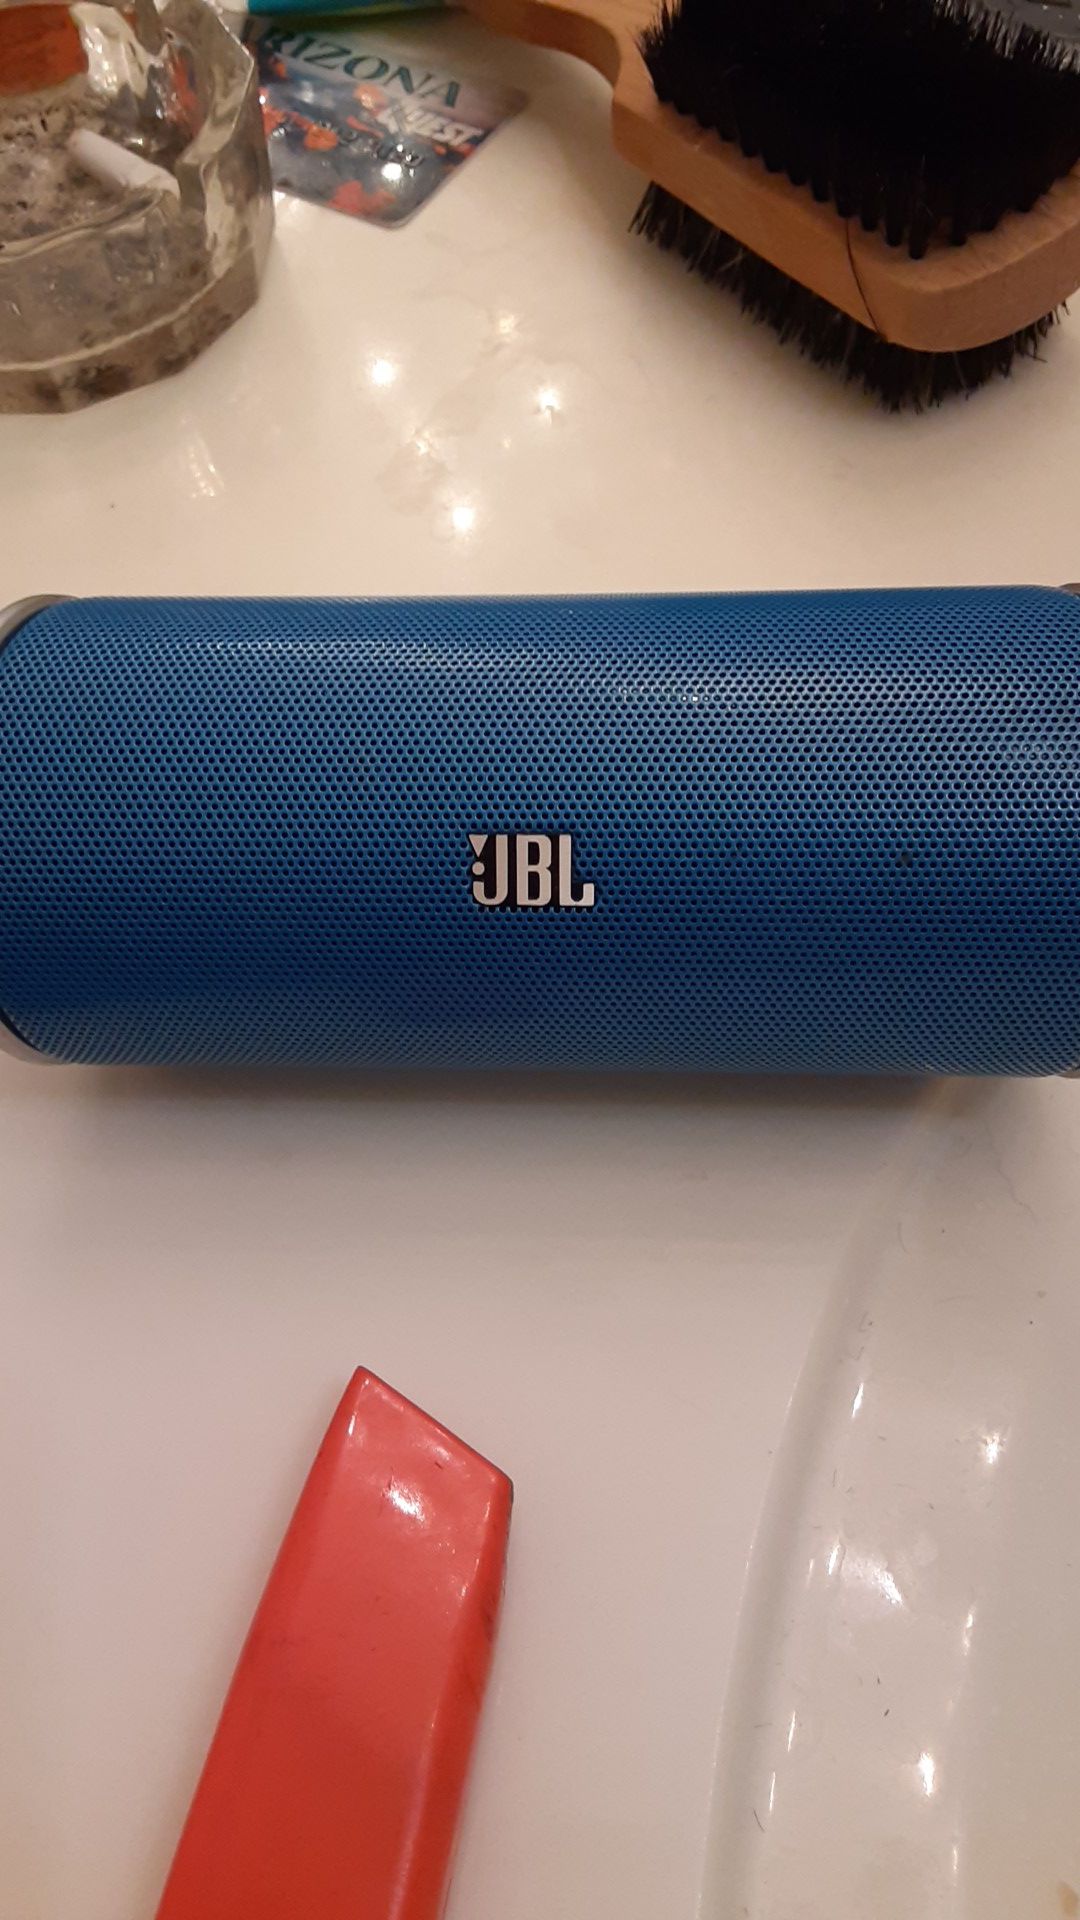 Jbl flip 1 first model charger not included